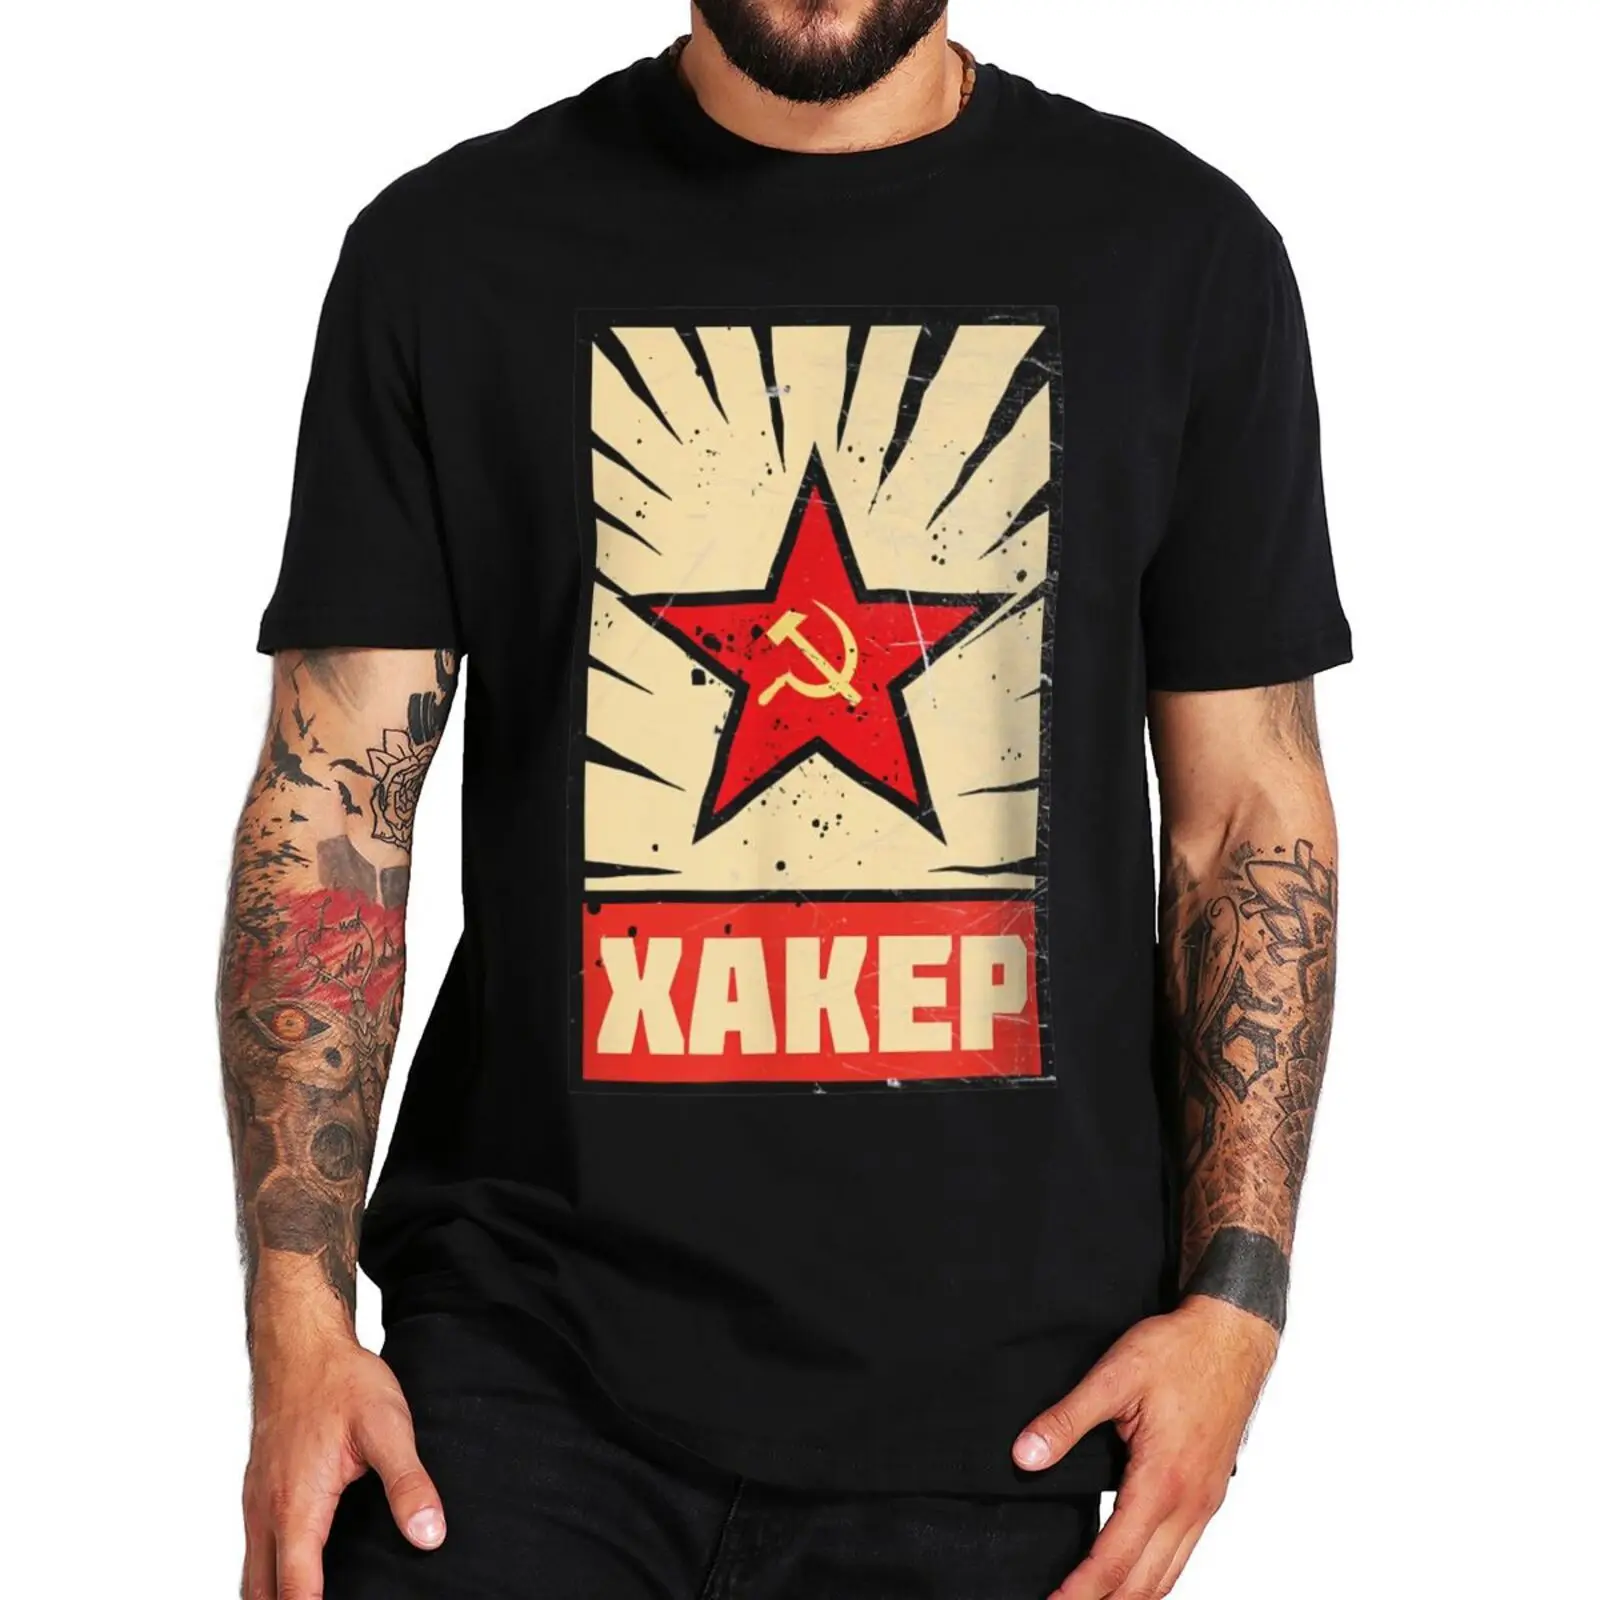 

Vintage Xakep USSR Cybersecurity T Shirt Funny Russian Hacker Inspired Cool Short Sleeve EU Size Summer Casual Unisex T-shirts